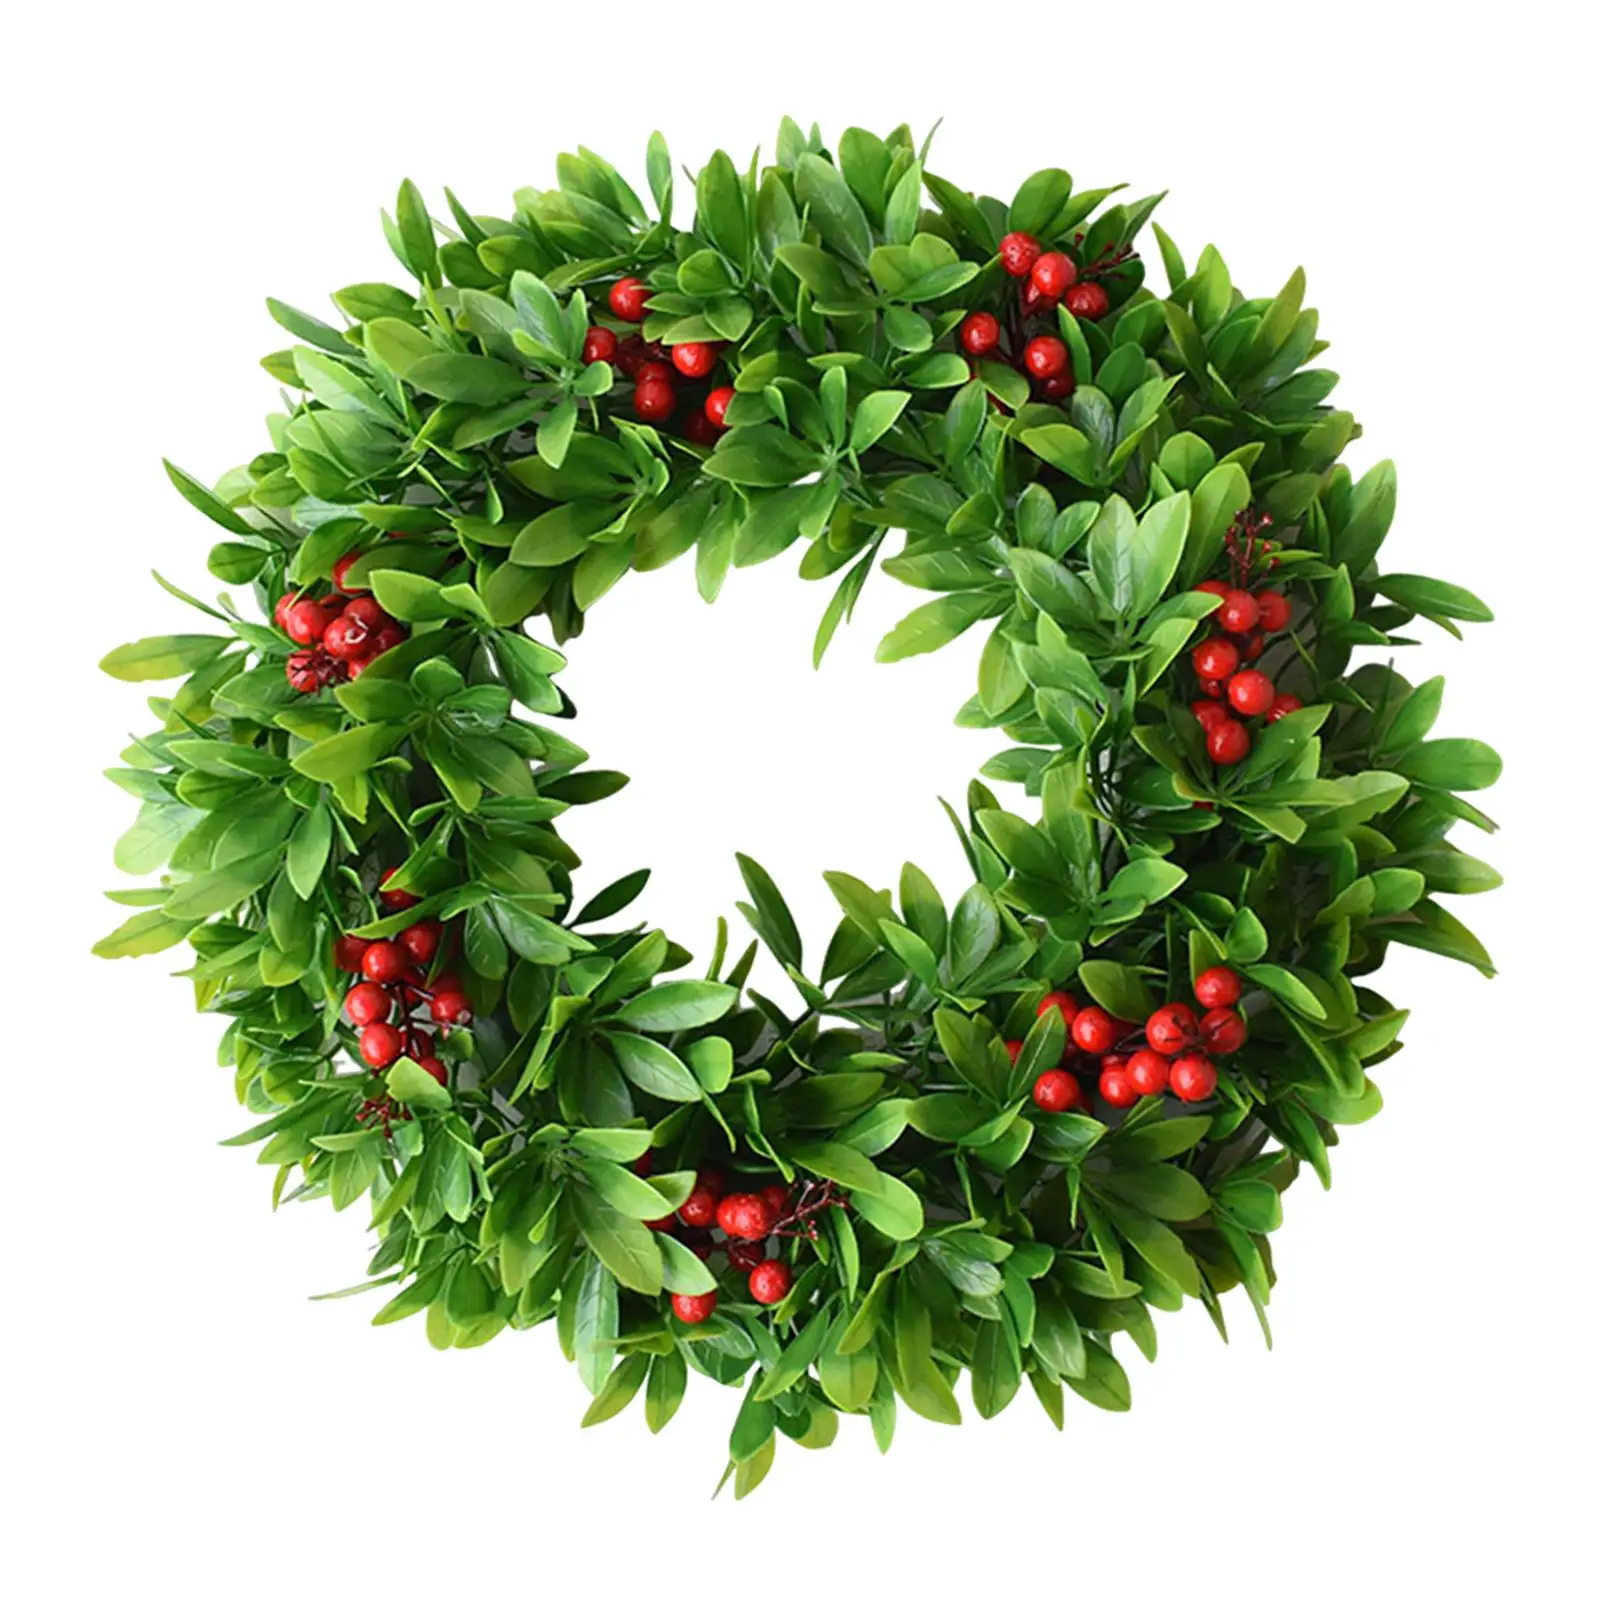 Artificial Christmas Wreath 45cm Green Leaves Red Berries Indoor Outdoor Xmas Wreath for Office Fireplace Wall Festival Wedding